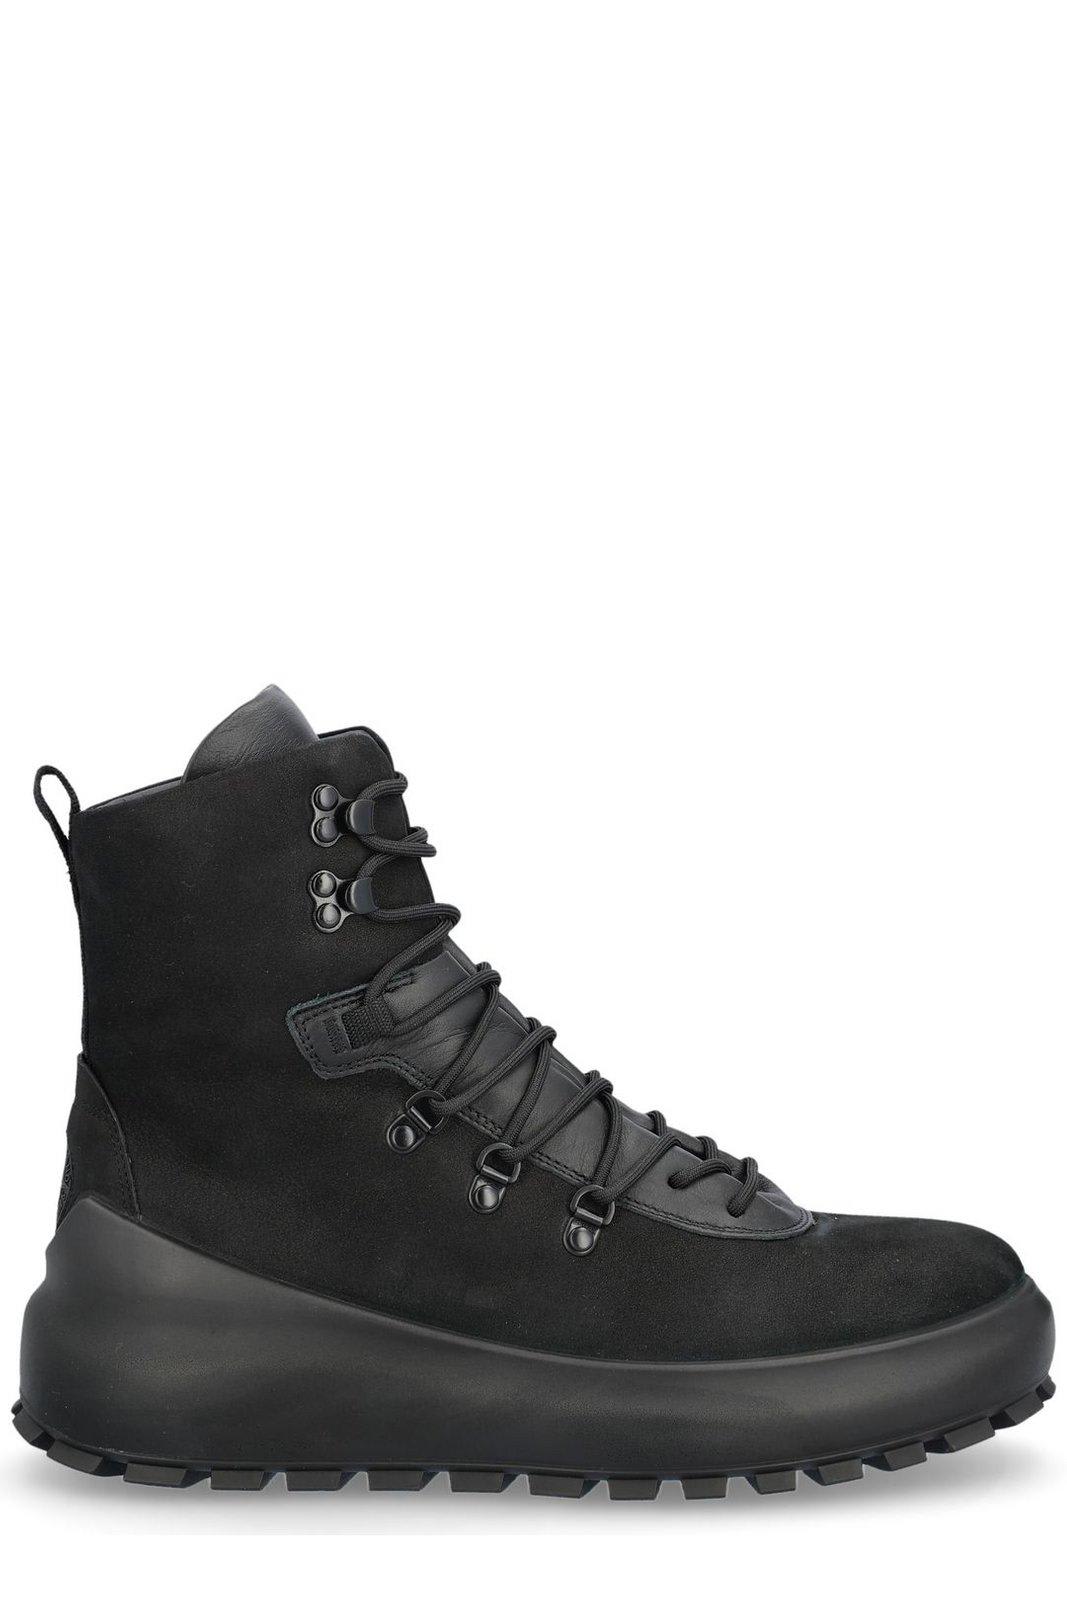 Stone Island Lace-up Boots